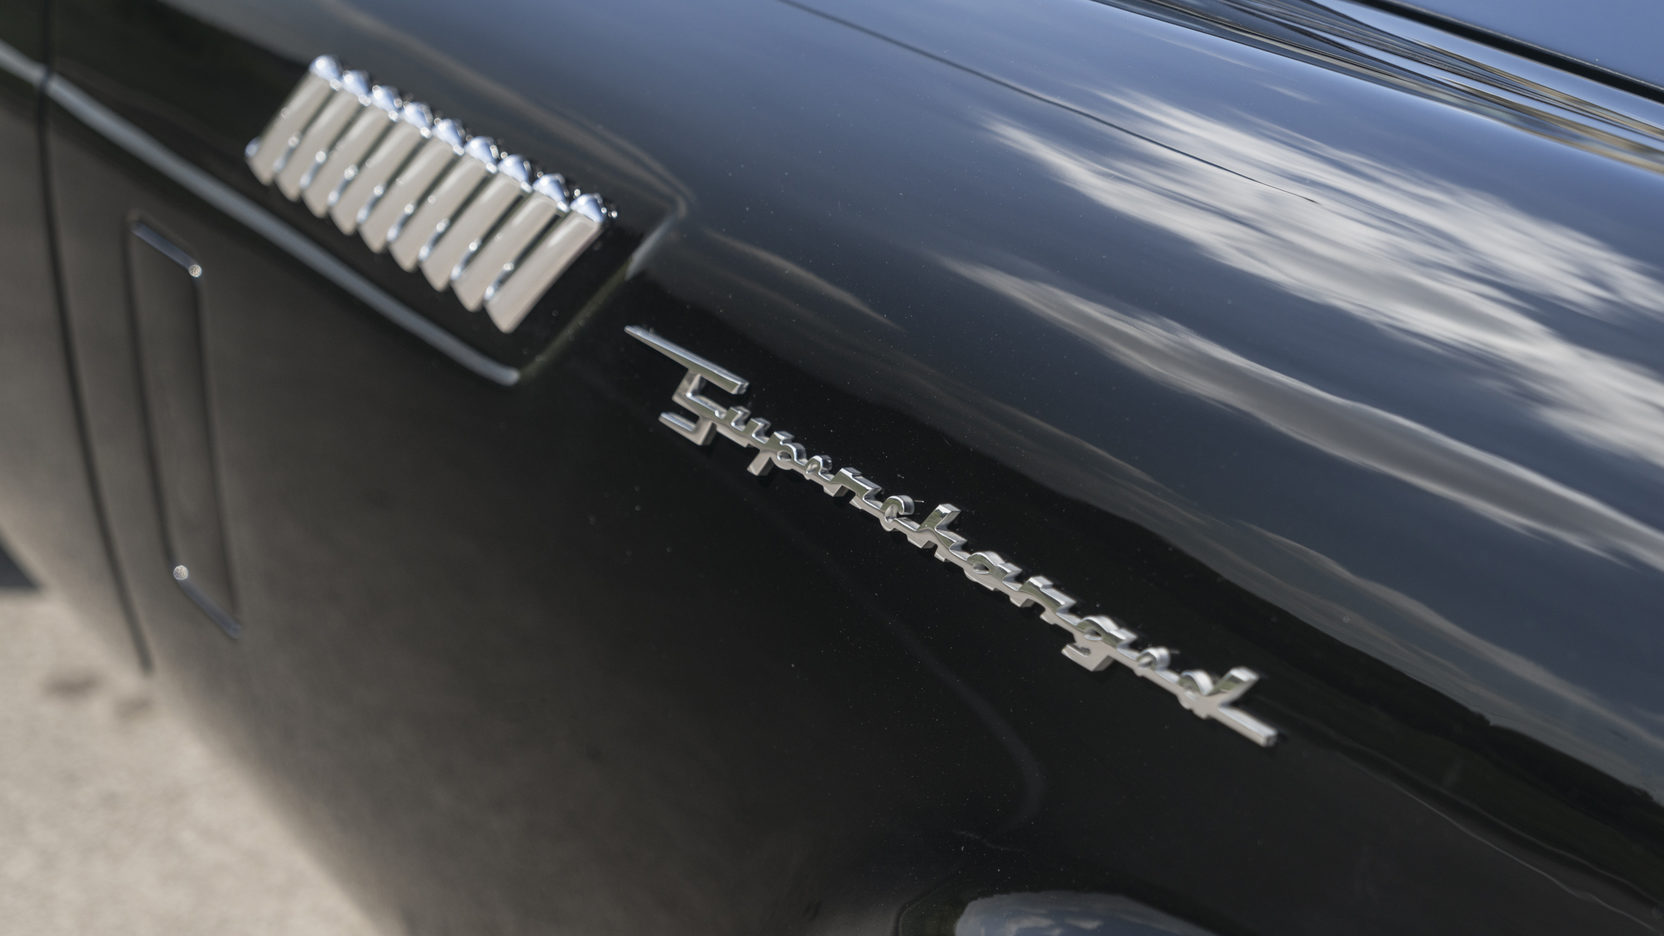 Just seventeen supercharged Thunderbirds were made by the factory.